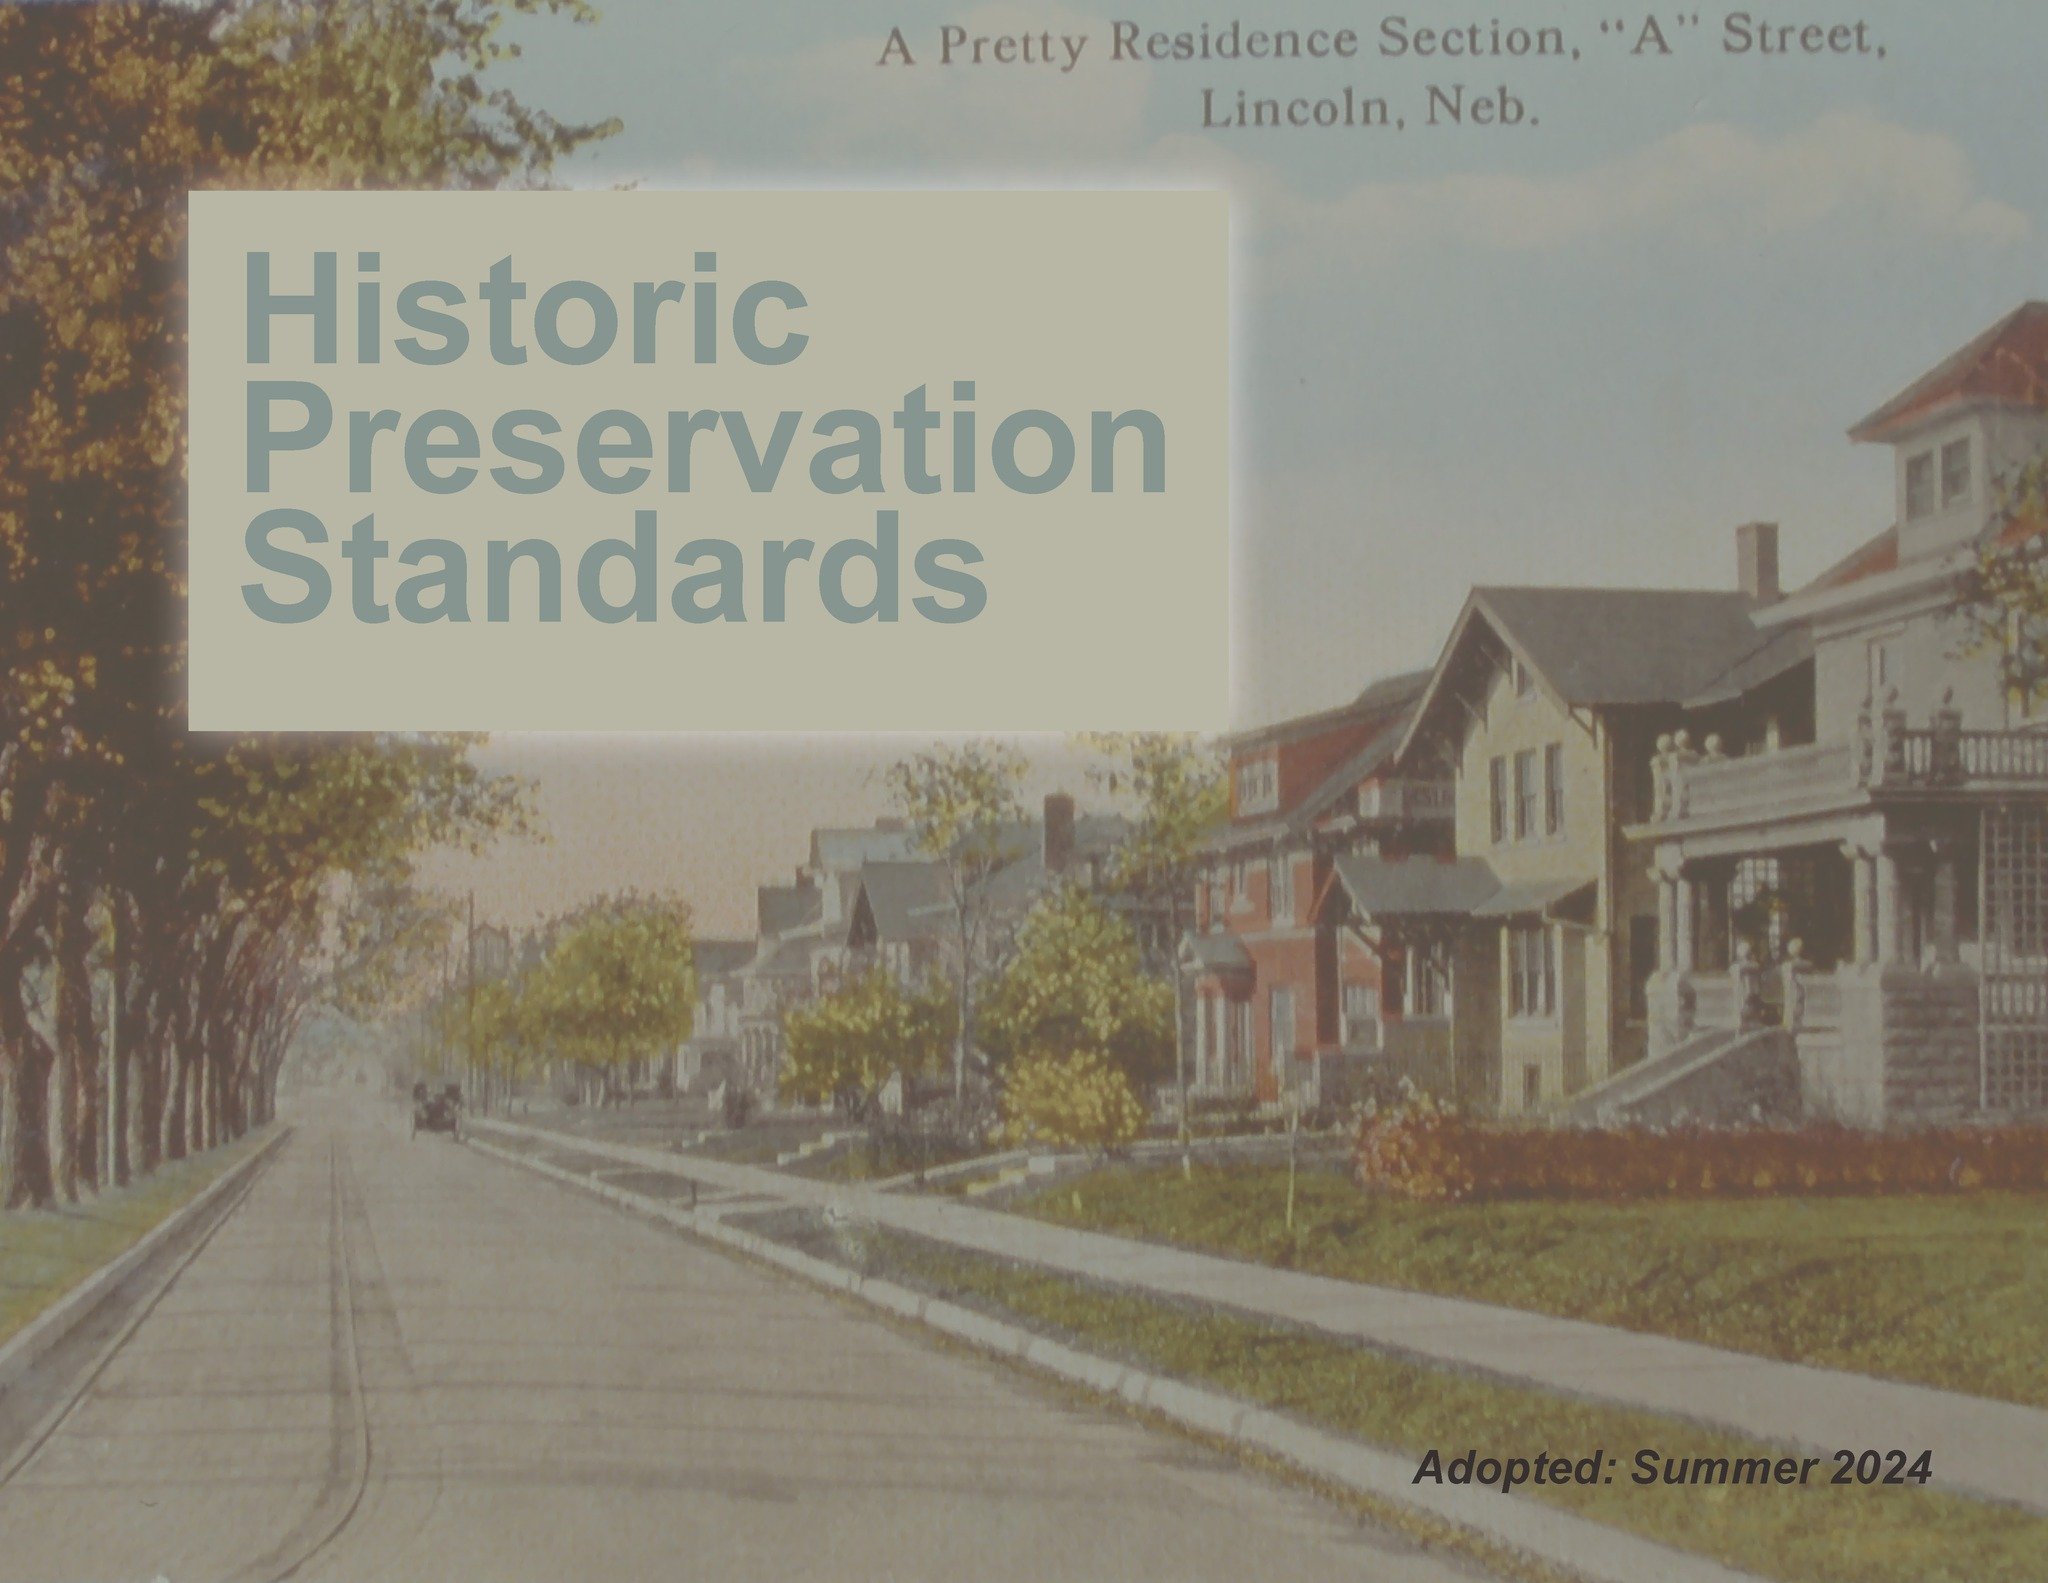 Next Wednesday, May 8th, the Lincoln-Lancaster County Planning Department is hosting an open house from 5pm to 7 pm at the Auld Pavilion (1650 Memorial Drive) to discuss the draft historic preservation design standards, planned for public hearing and